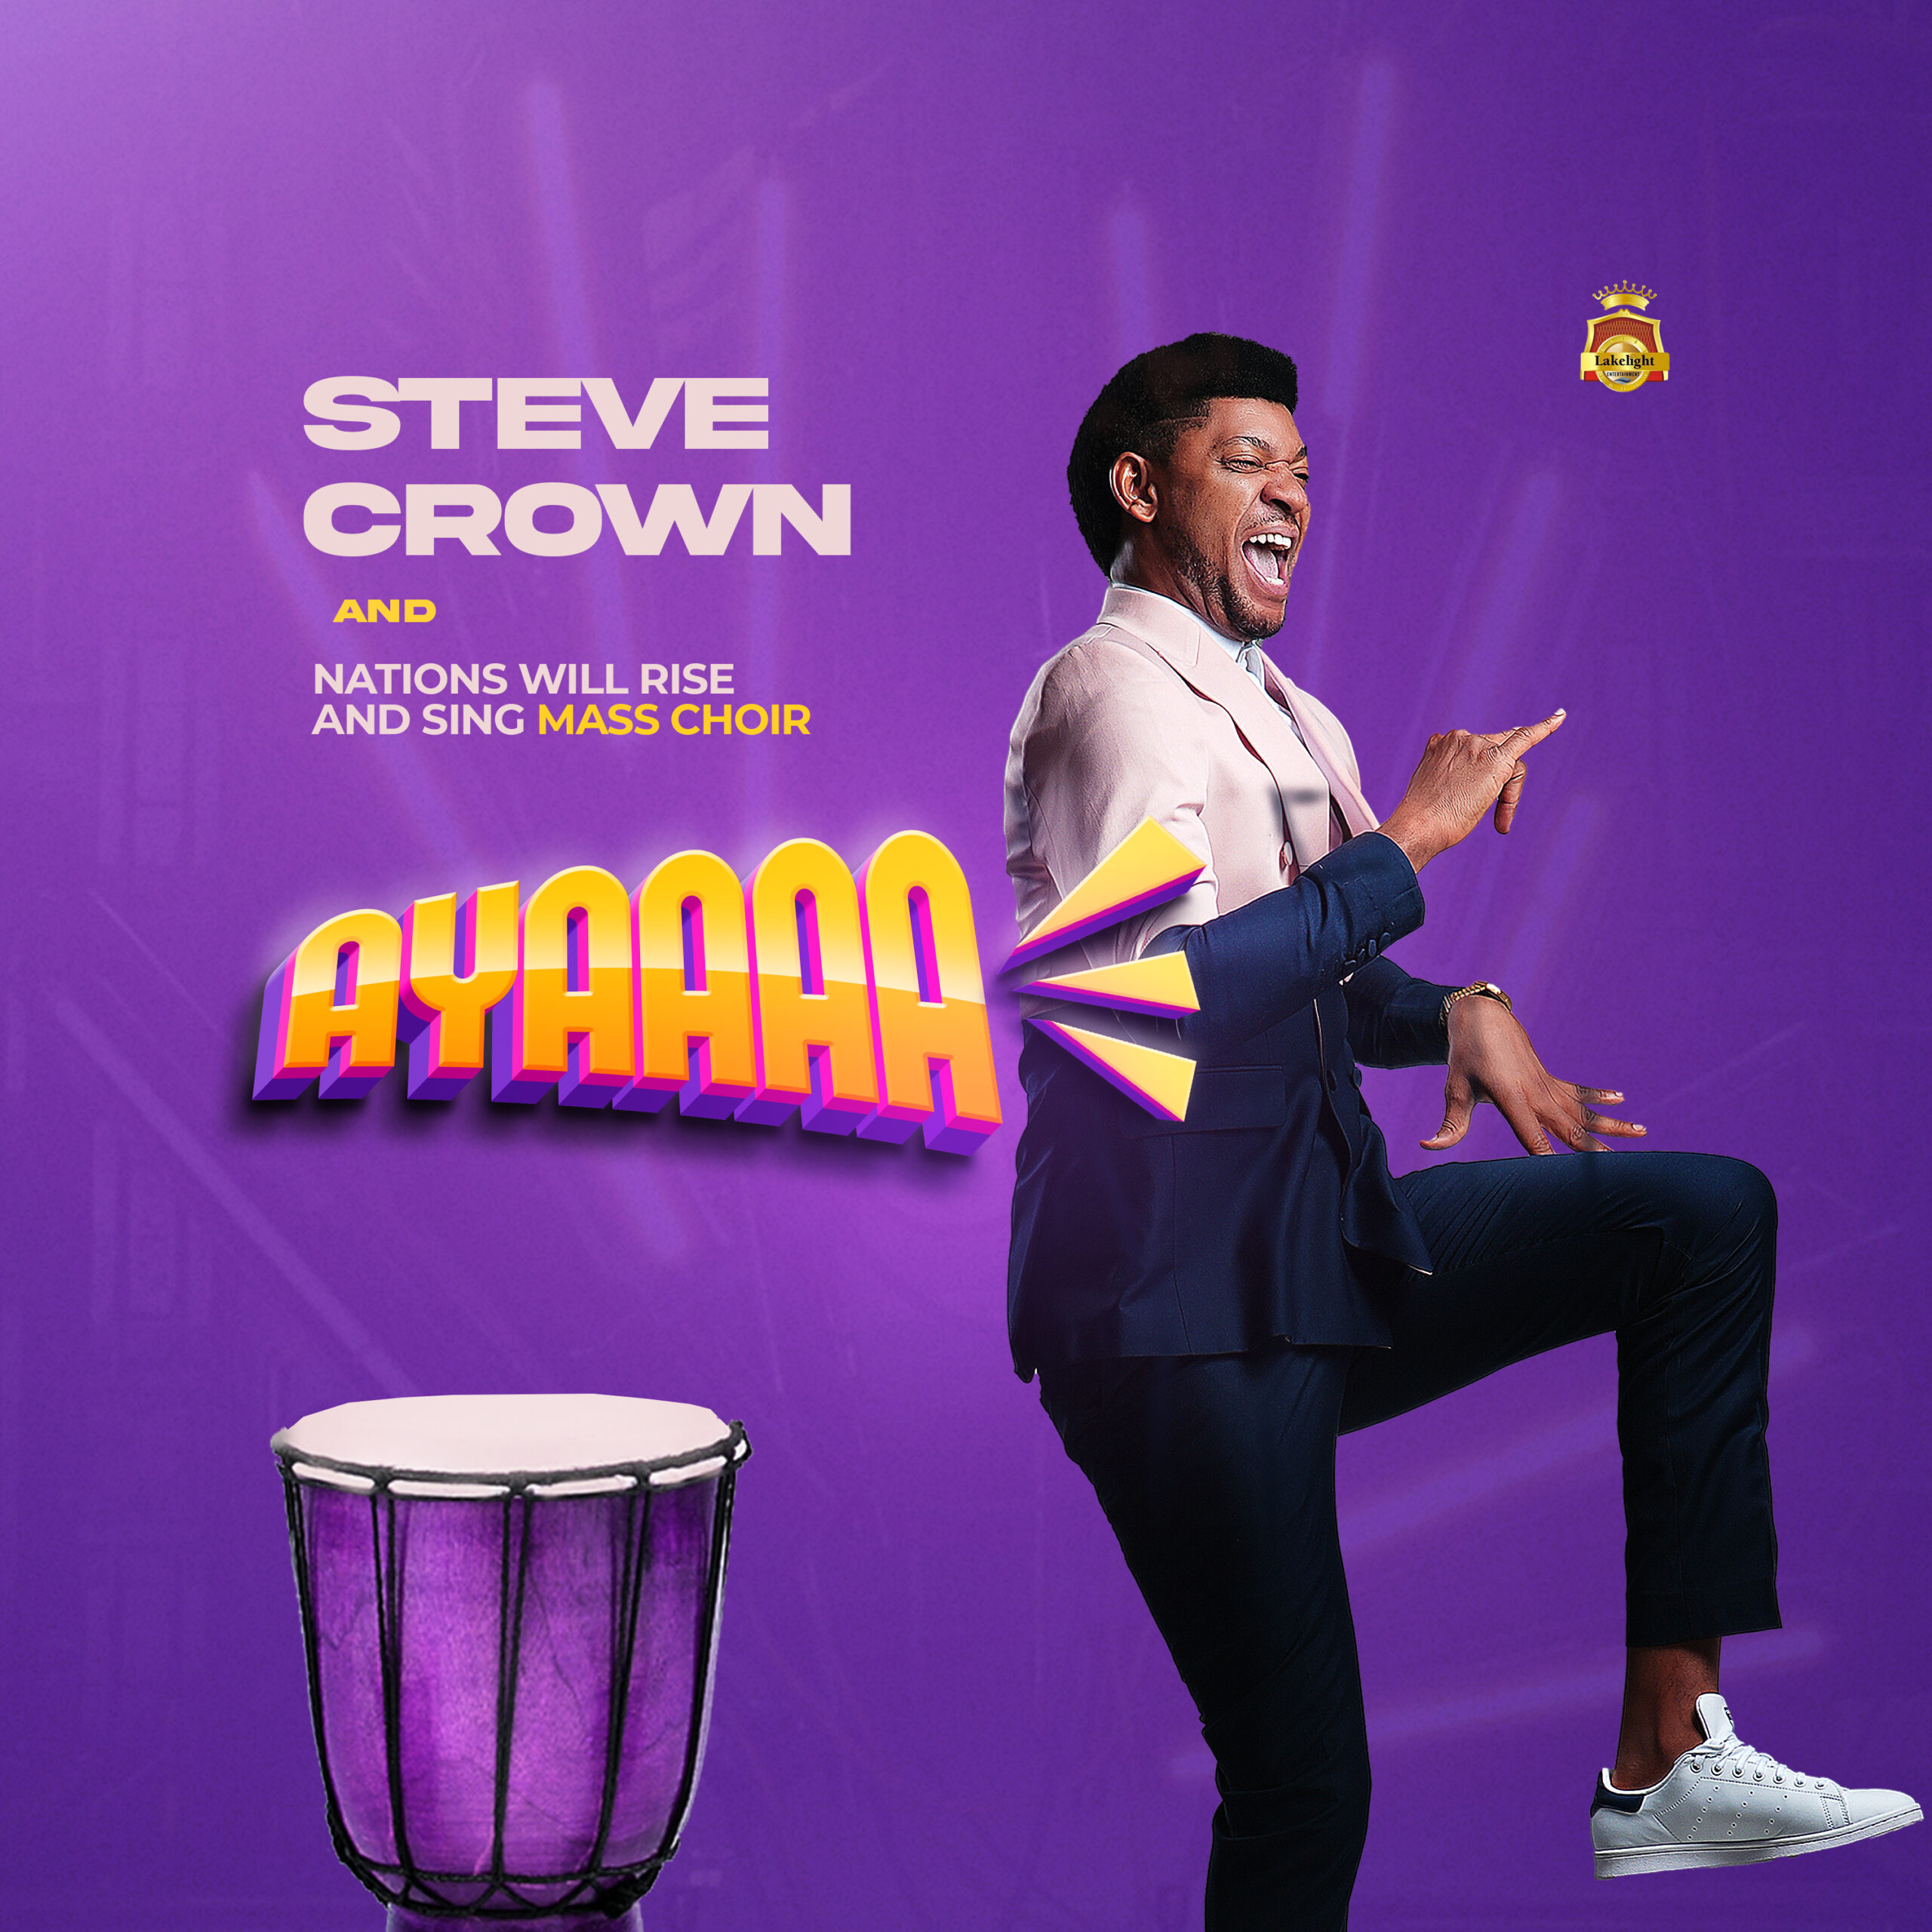 AYAAAAA by Steve Crown x Nations Will Rise And Sing Mass Choir